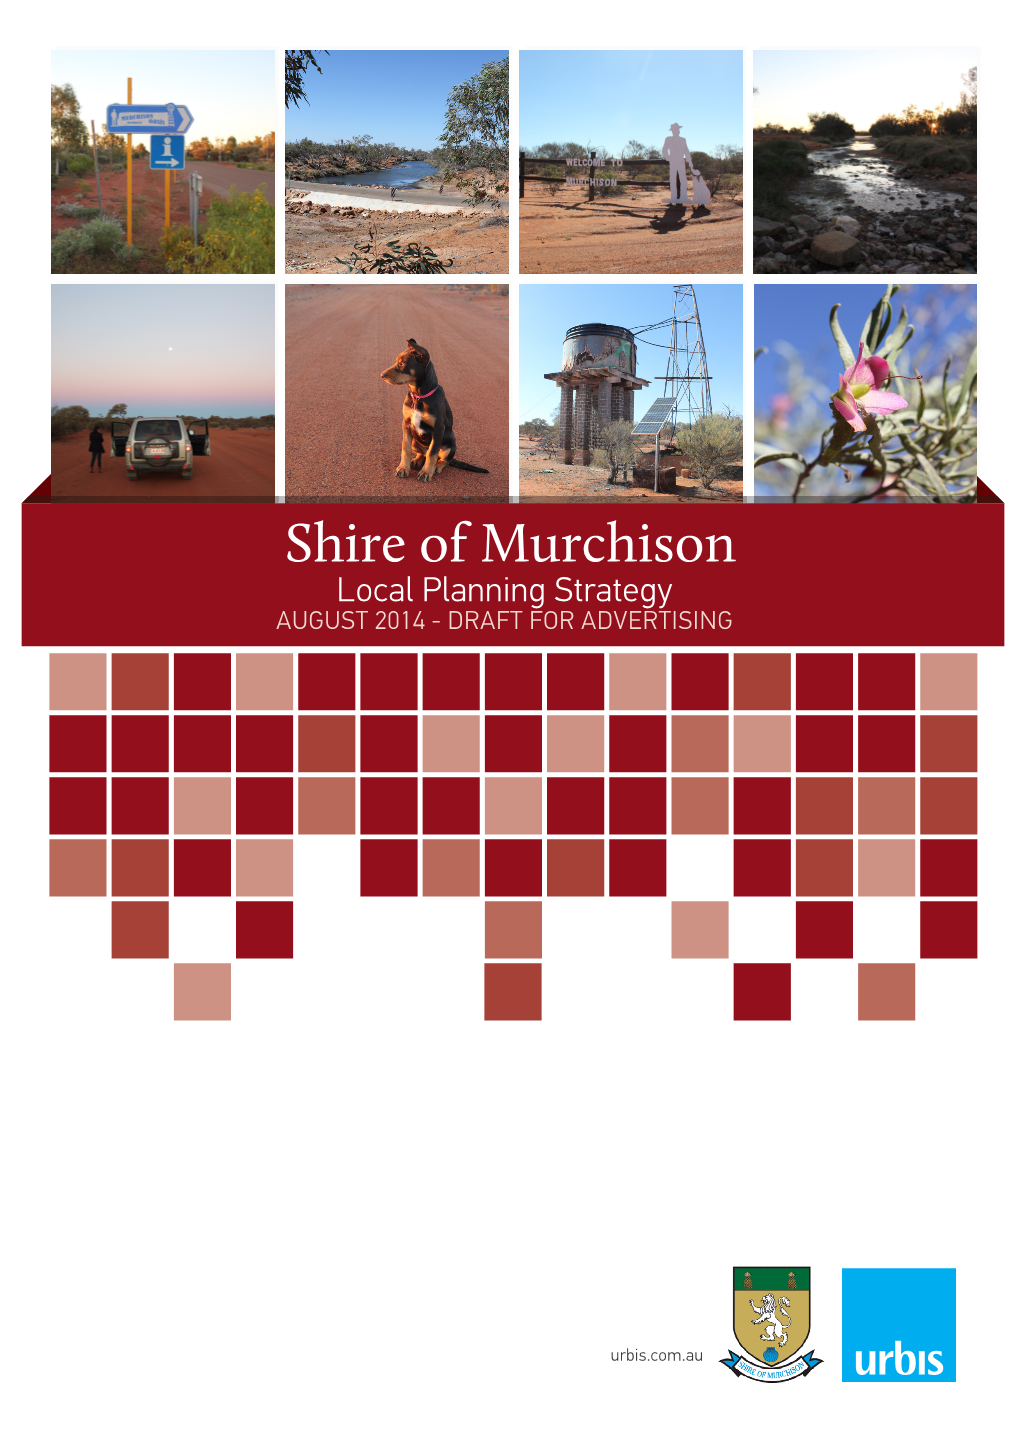 Shire of Murchison Local Planning Strategy AUGUST 2014 - DRAFT for ADVERTISING